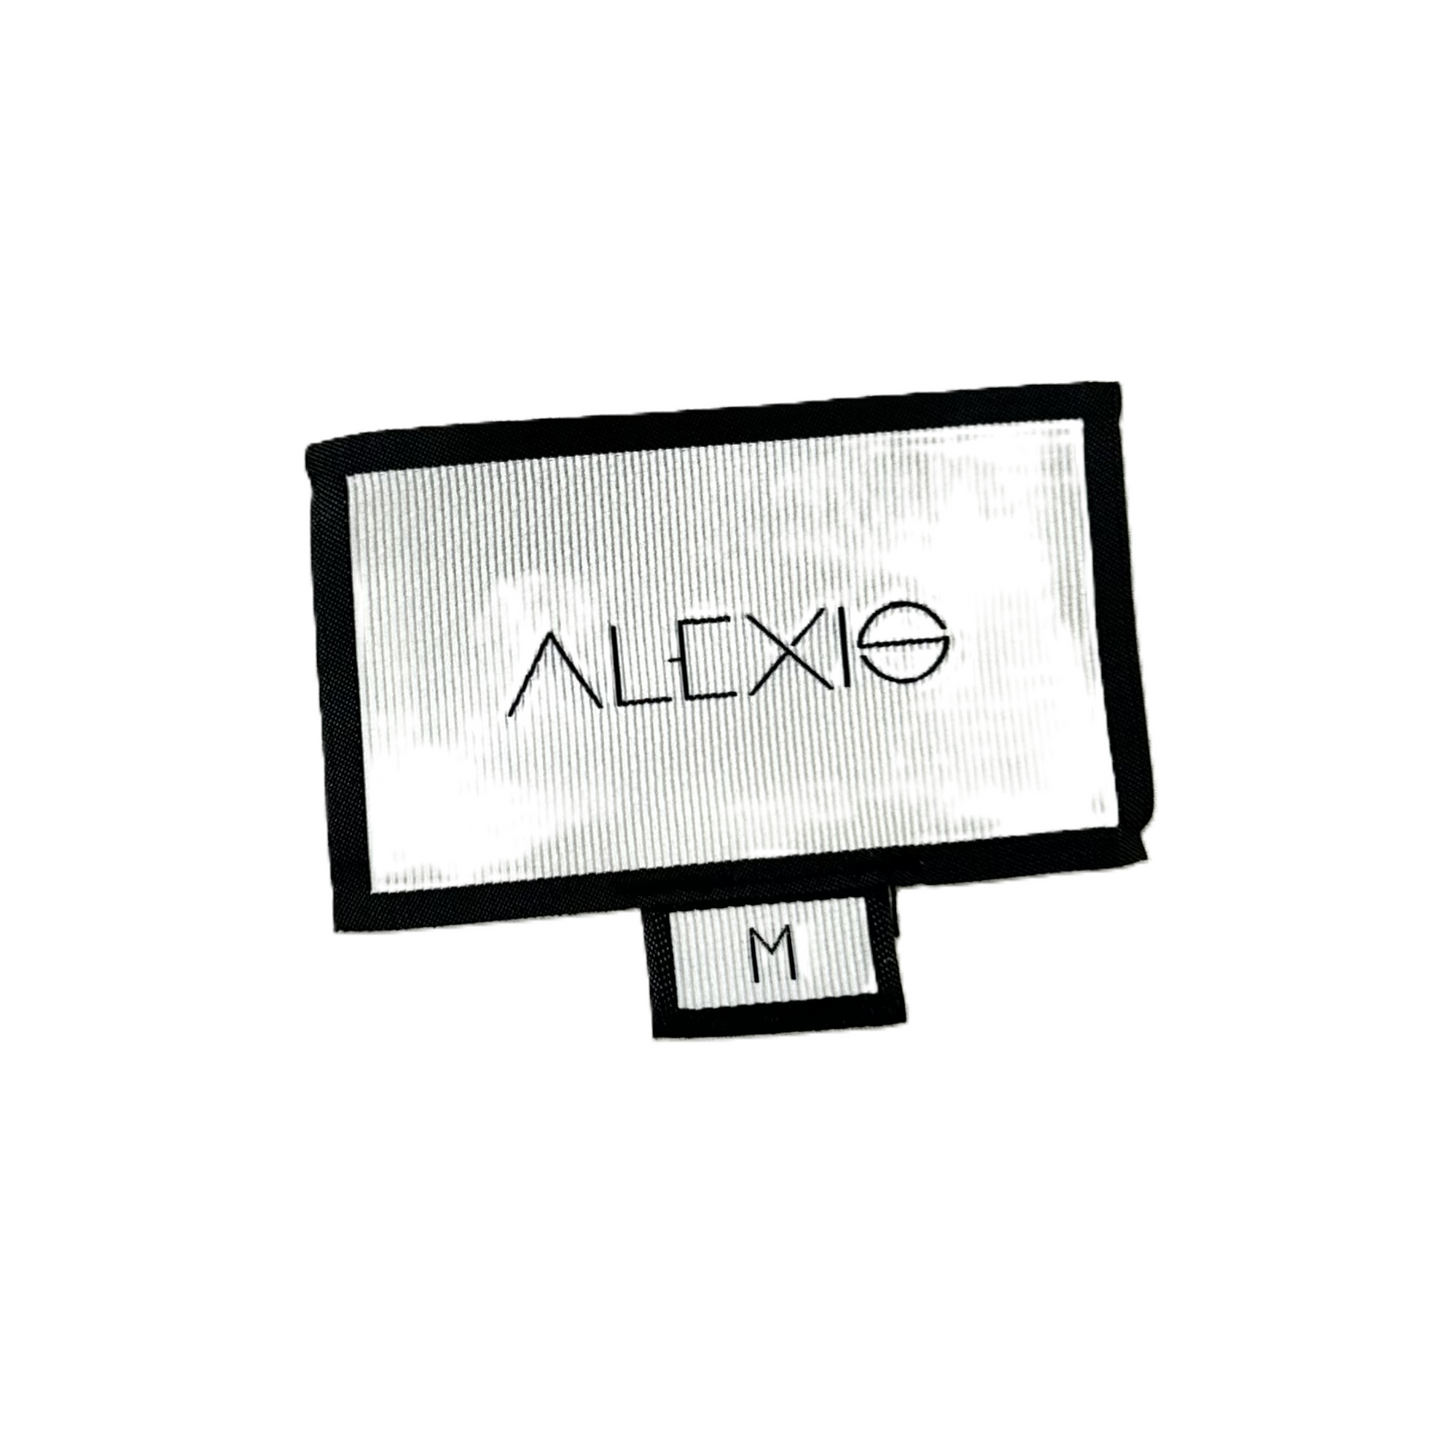 Top Short Sleeve Designer By Alexie  Size: M